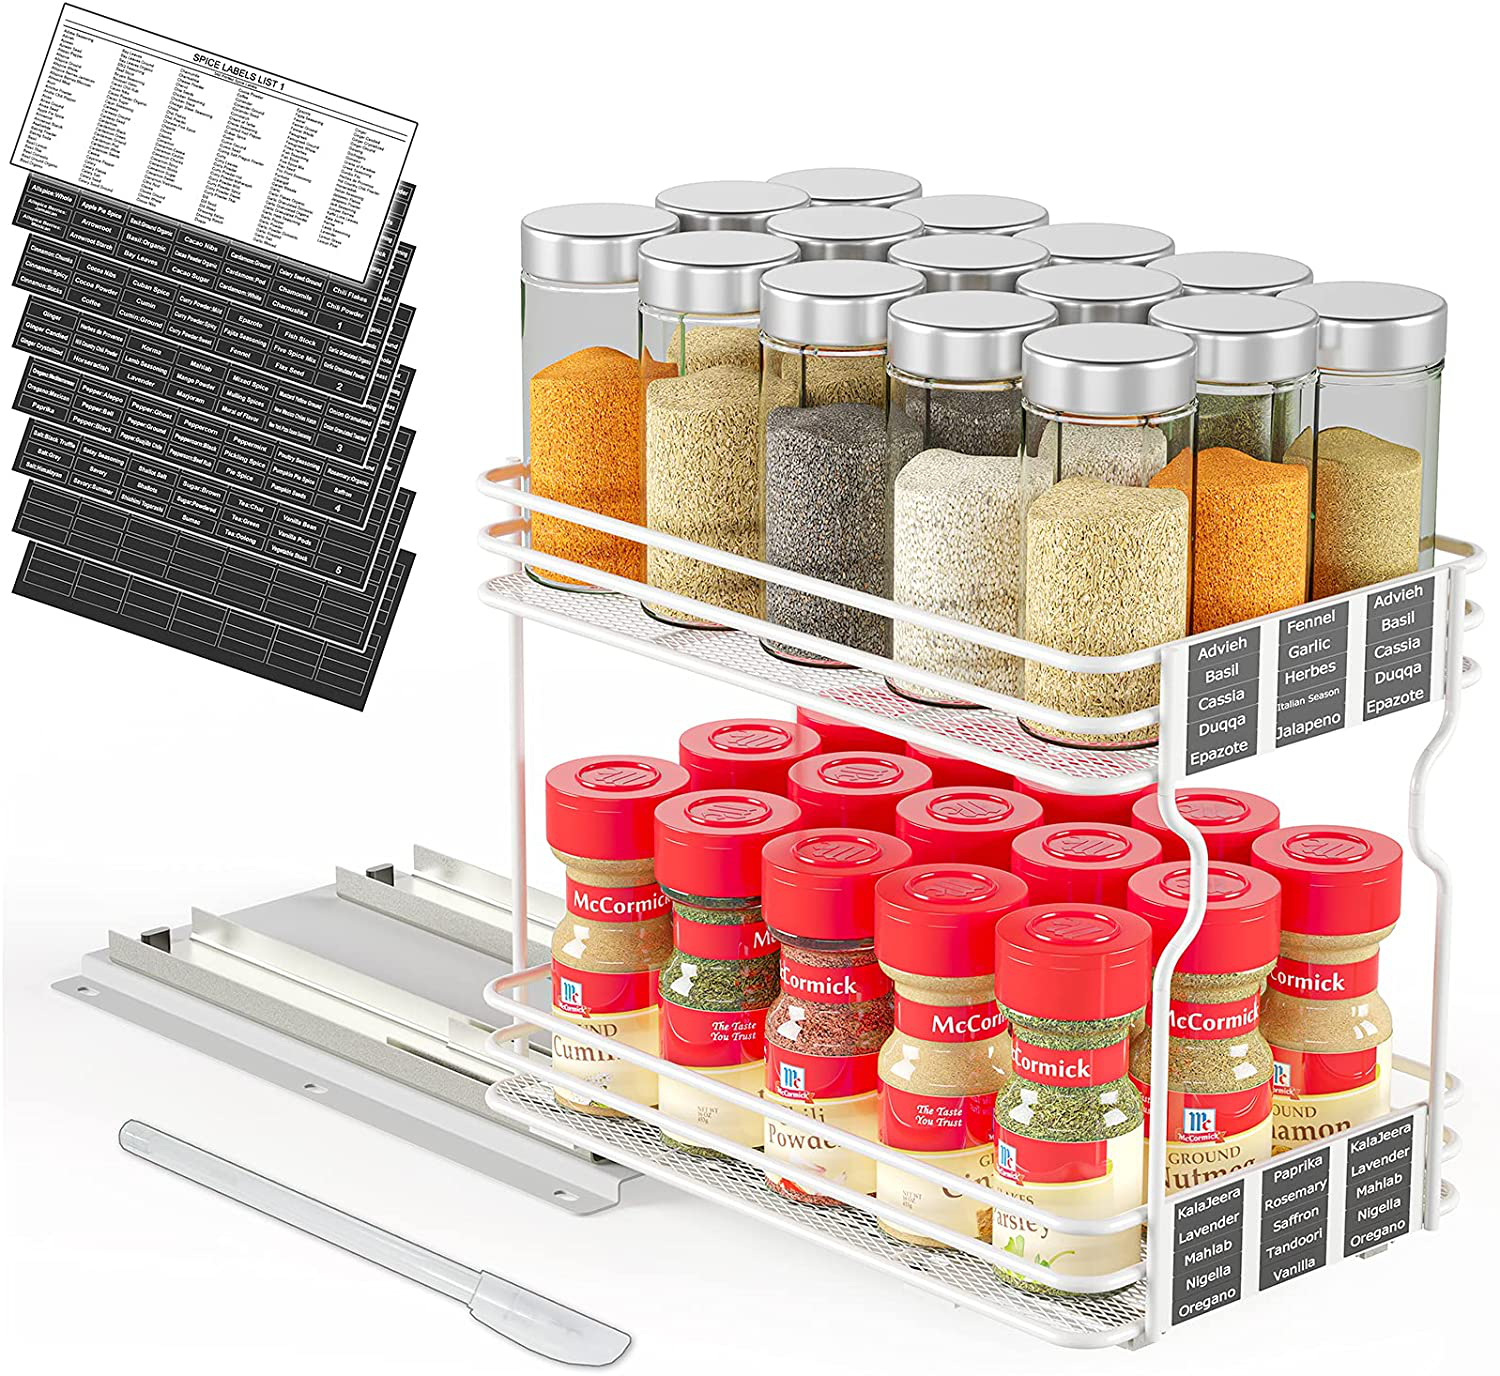  SpaceAid Pull Out Spice Rack Organizer for Cabinet, Heavy Duty  Slide Out Seasoning Kitchen Organizer, Cabinet Organizer, with Labels and  Chalk Marker, 6.5 W x10.75 D x8.5 H, 1 Drawer 2-Tier 